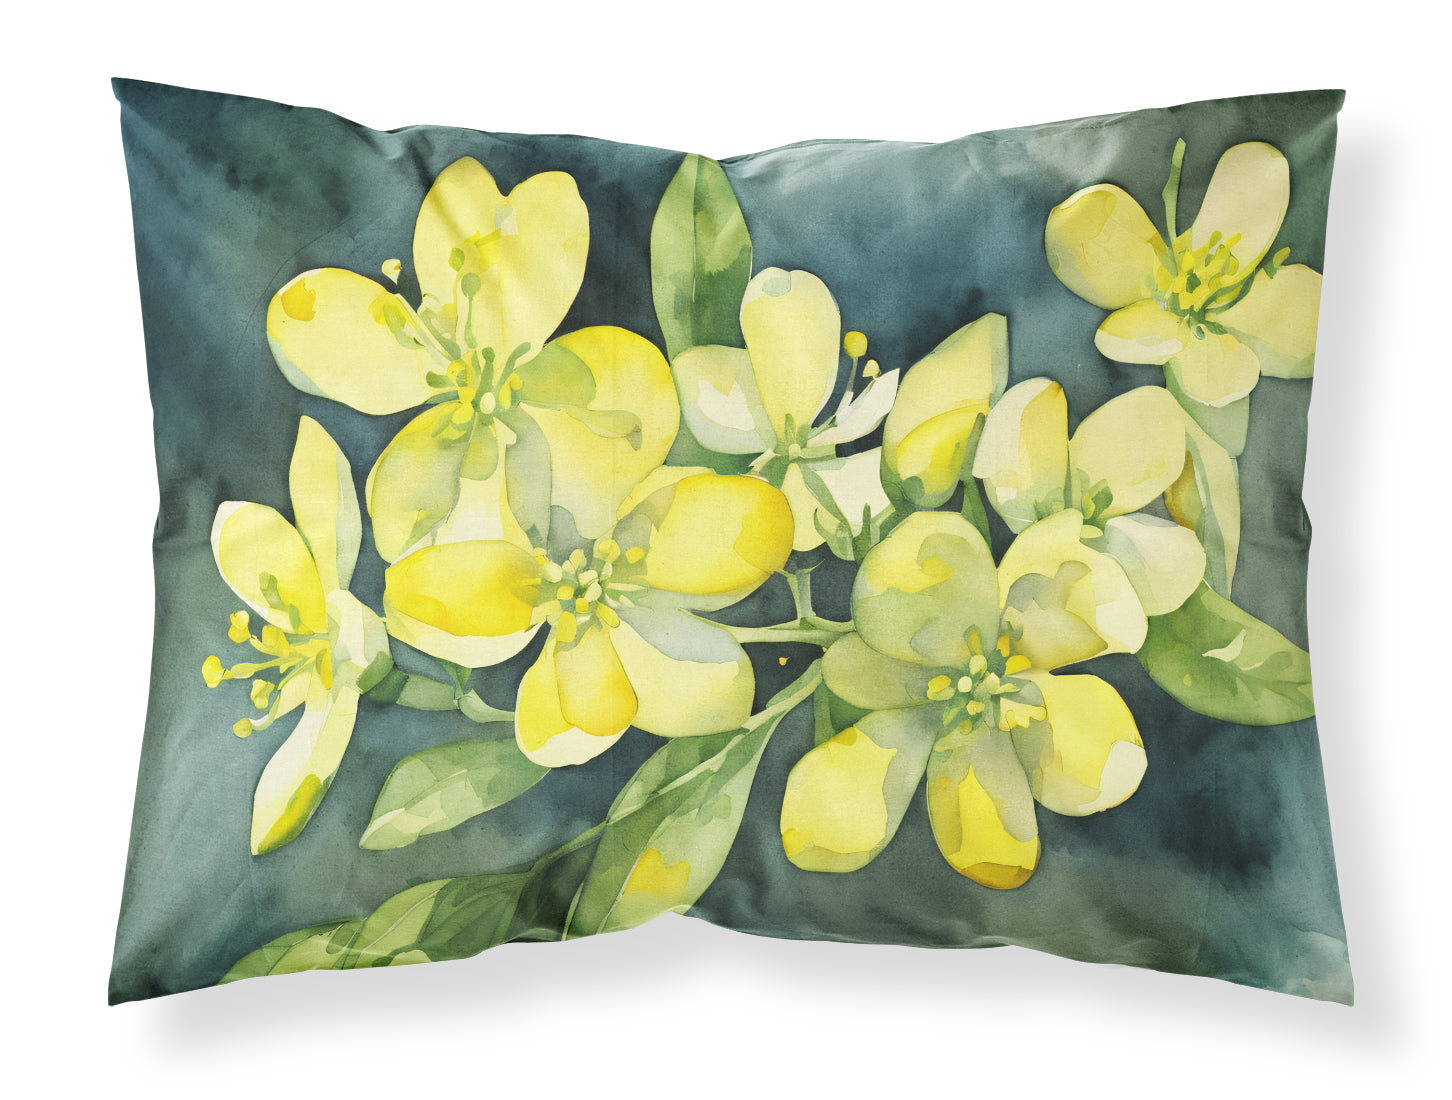 Buy this South Carolina Yellow Jessamine in Watercolor Fabric Standard Pillowcase